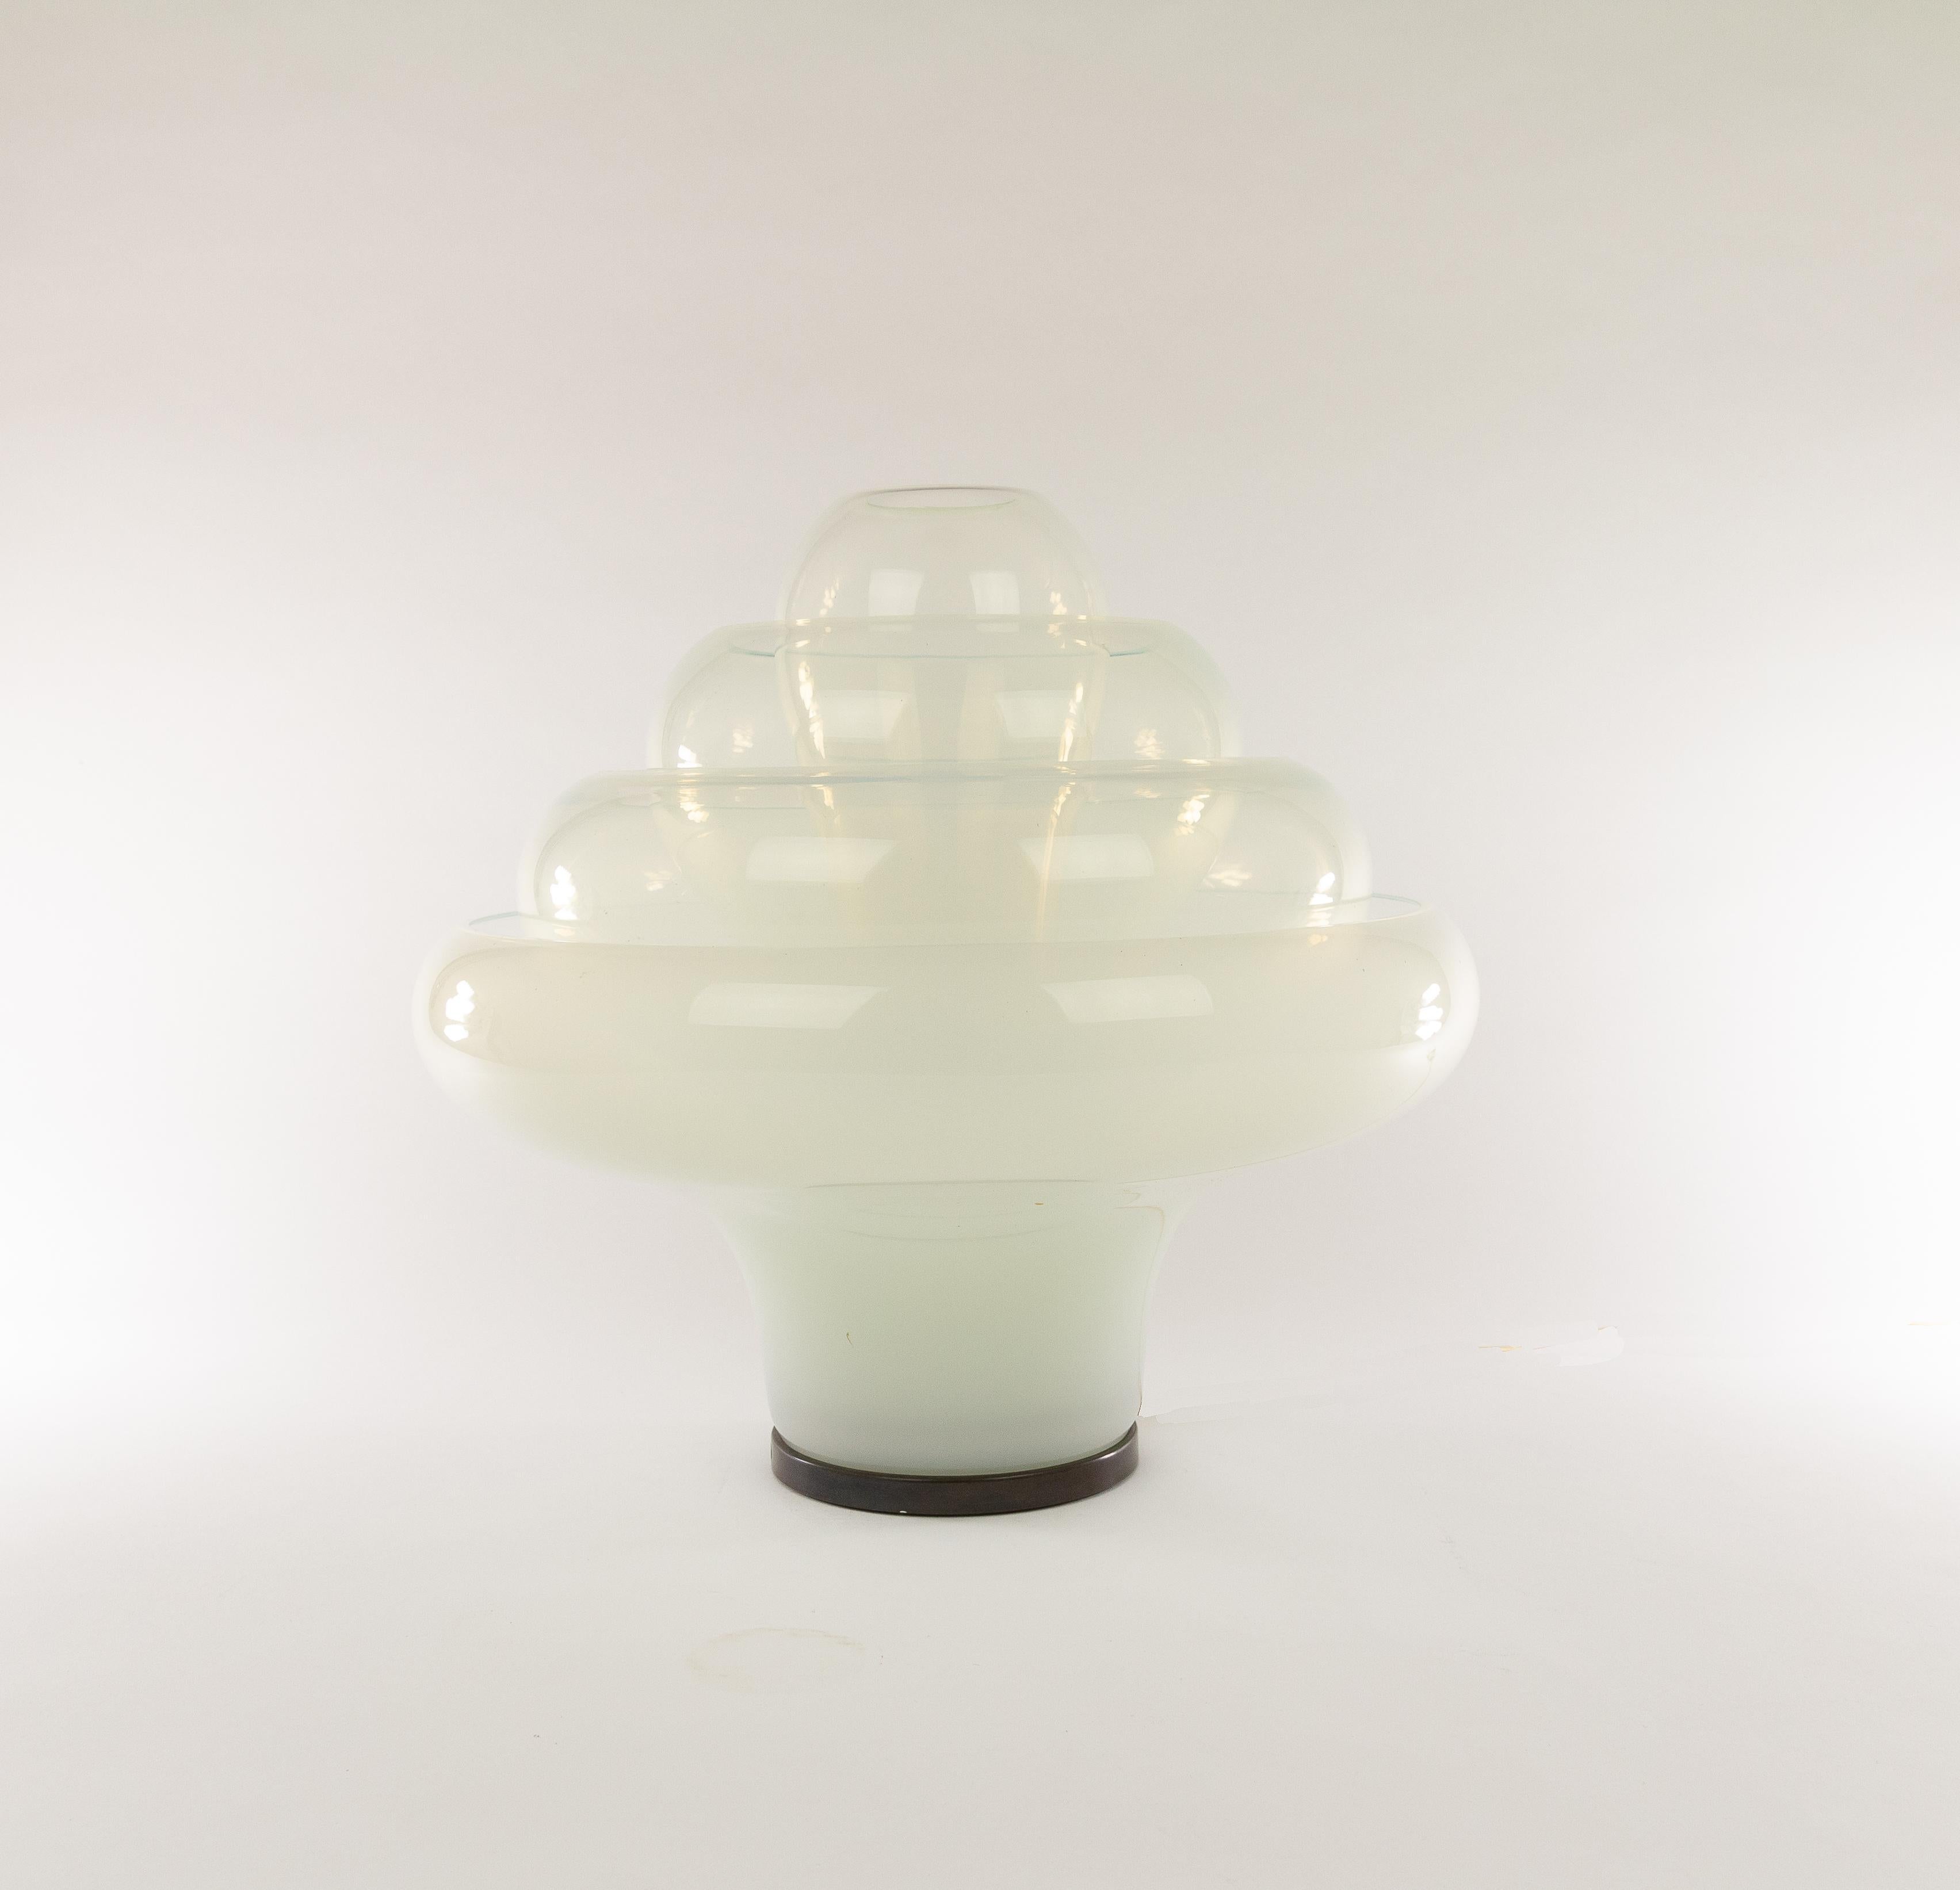 Mesmerizing table lamp, model LT 305, by 'glass magician' Carlo Nason for A.V. Mazzega in the 1960s.

This ingenious object, nicknamed Lotus, consists of four interlocking individual glass shades, one central light bulb and a metal support